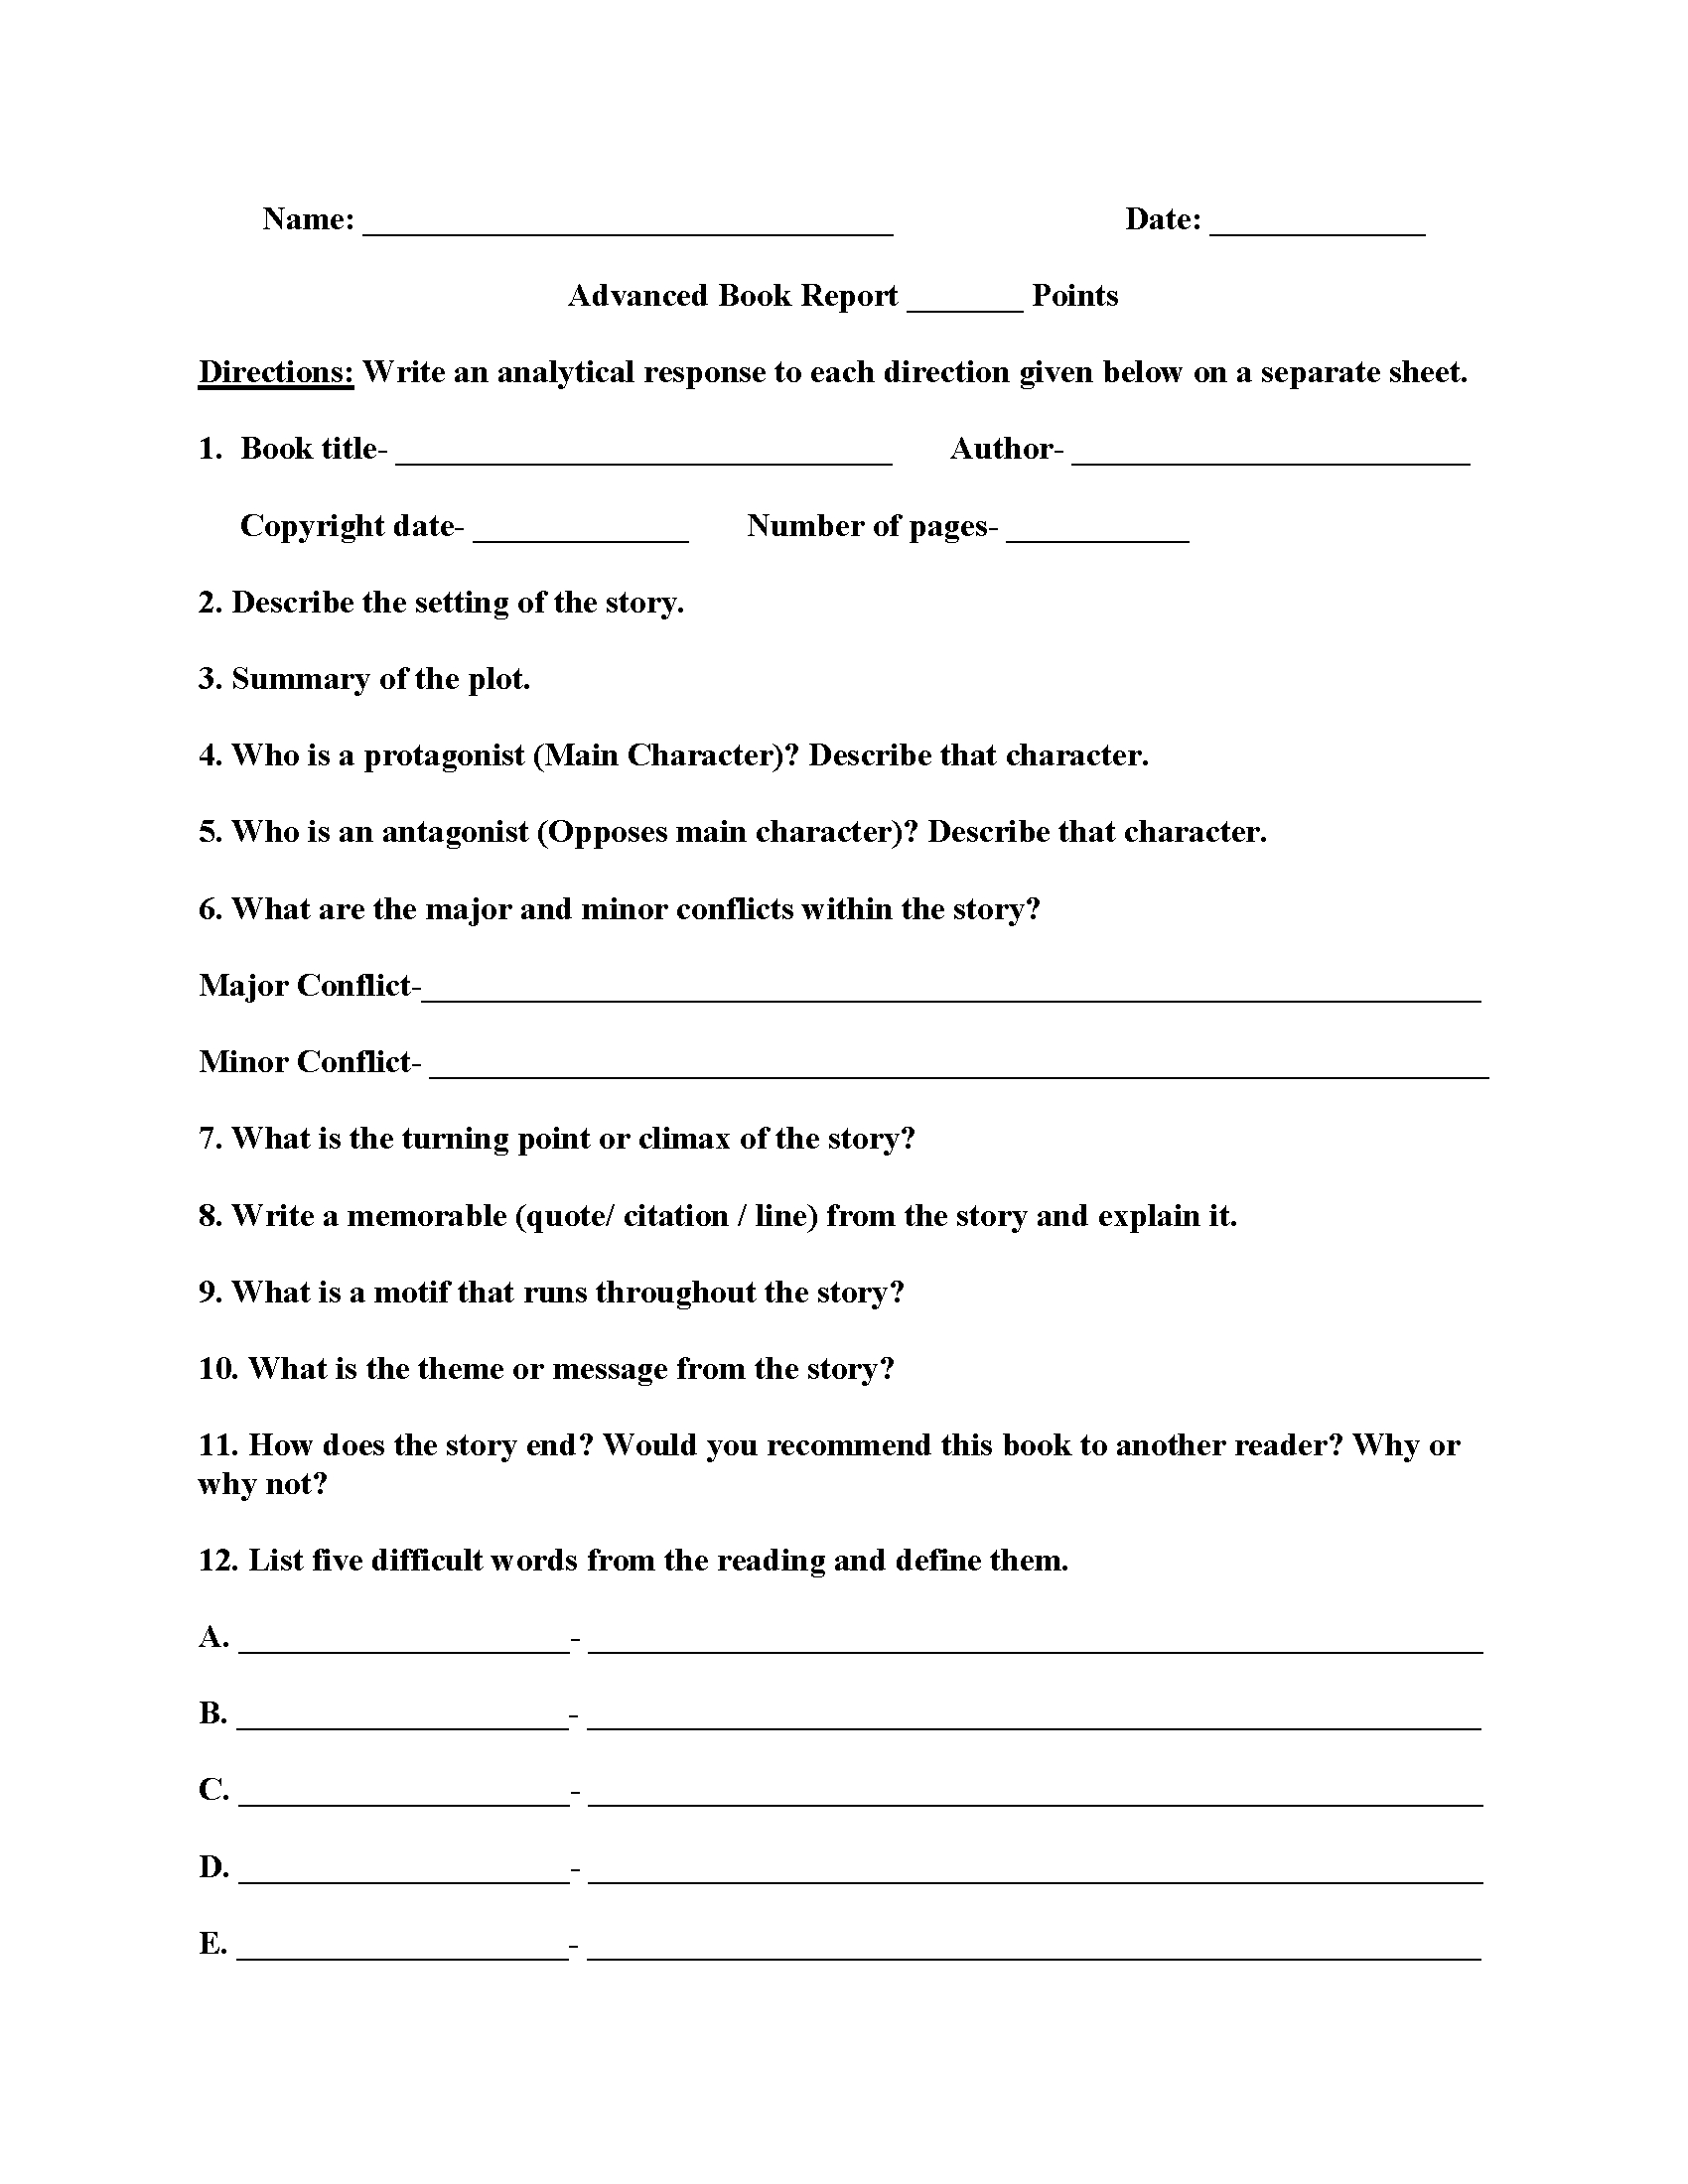 Advanced Book Report Worksheets | English | Book Report Templates | Printable Book Report Worksheets